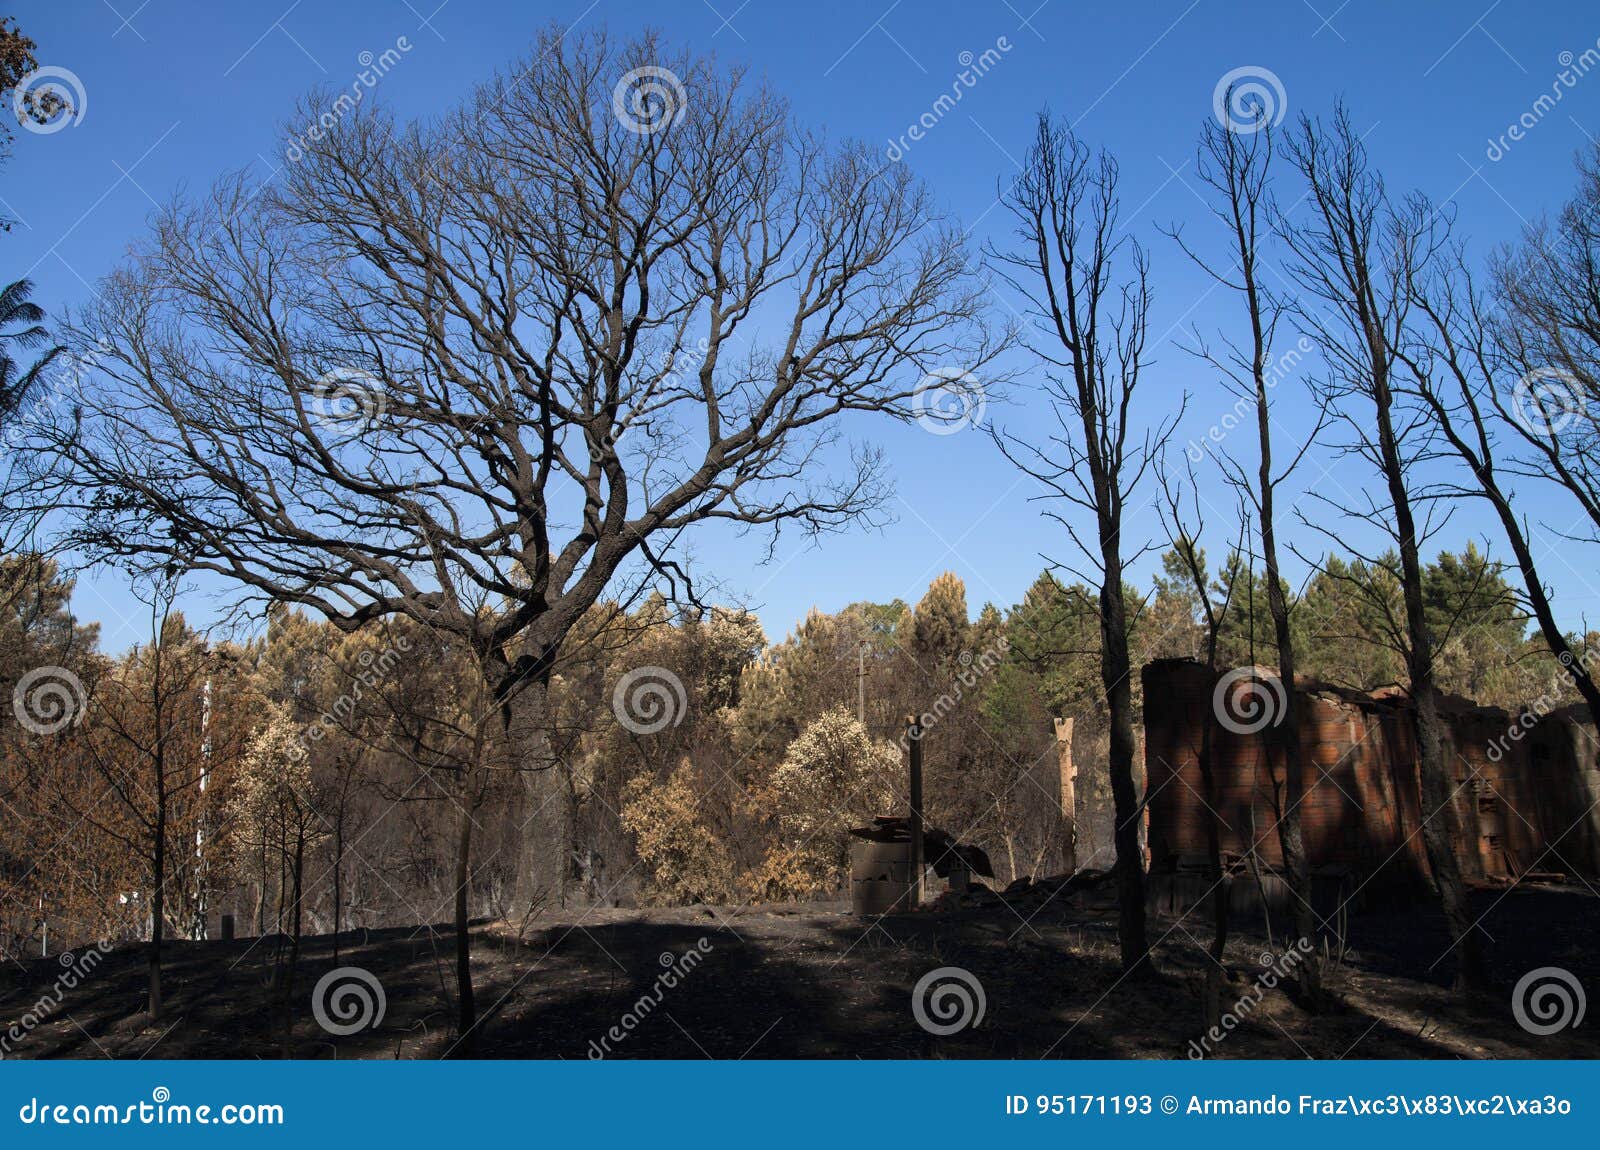 cork tree, pine trees and an old shed burnt to the ground - pedrogao grande